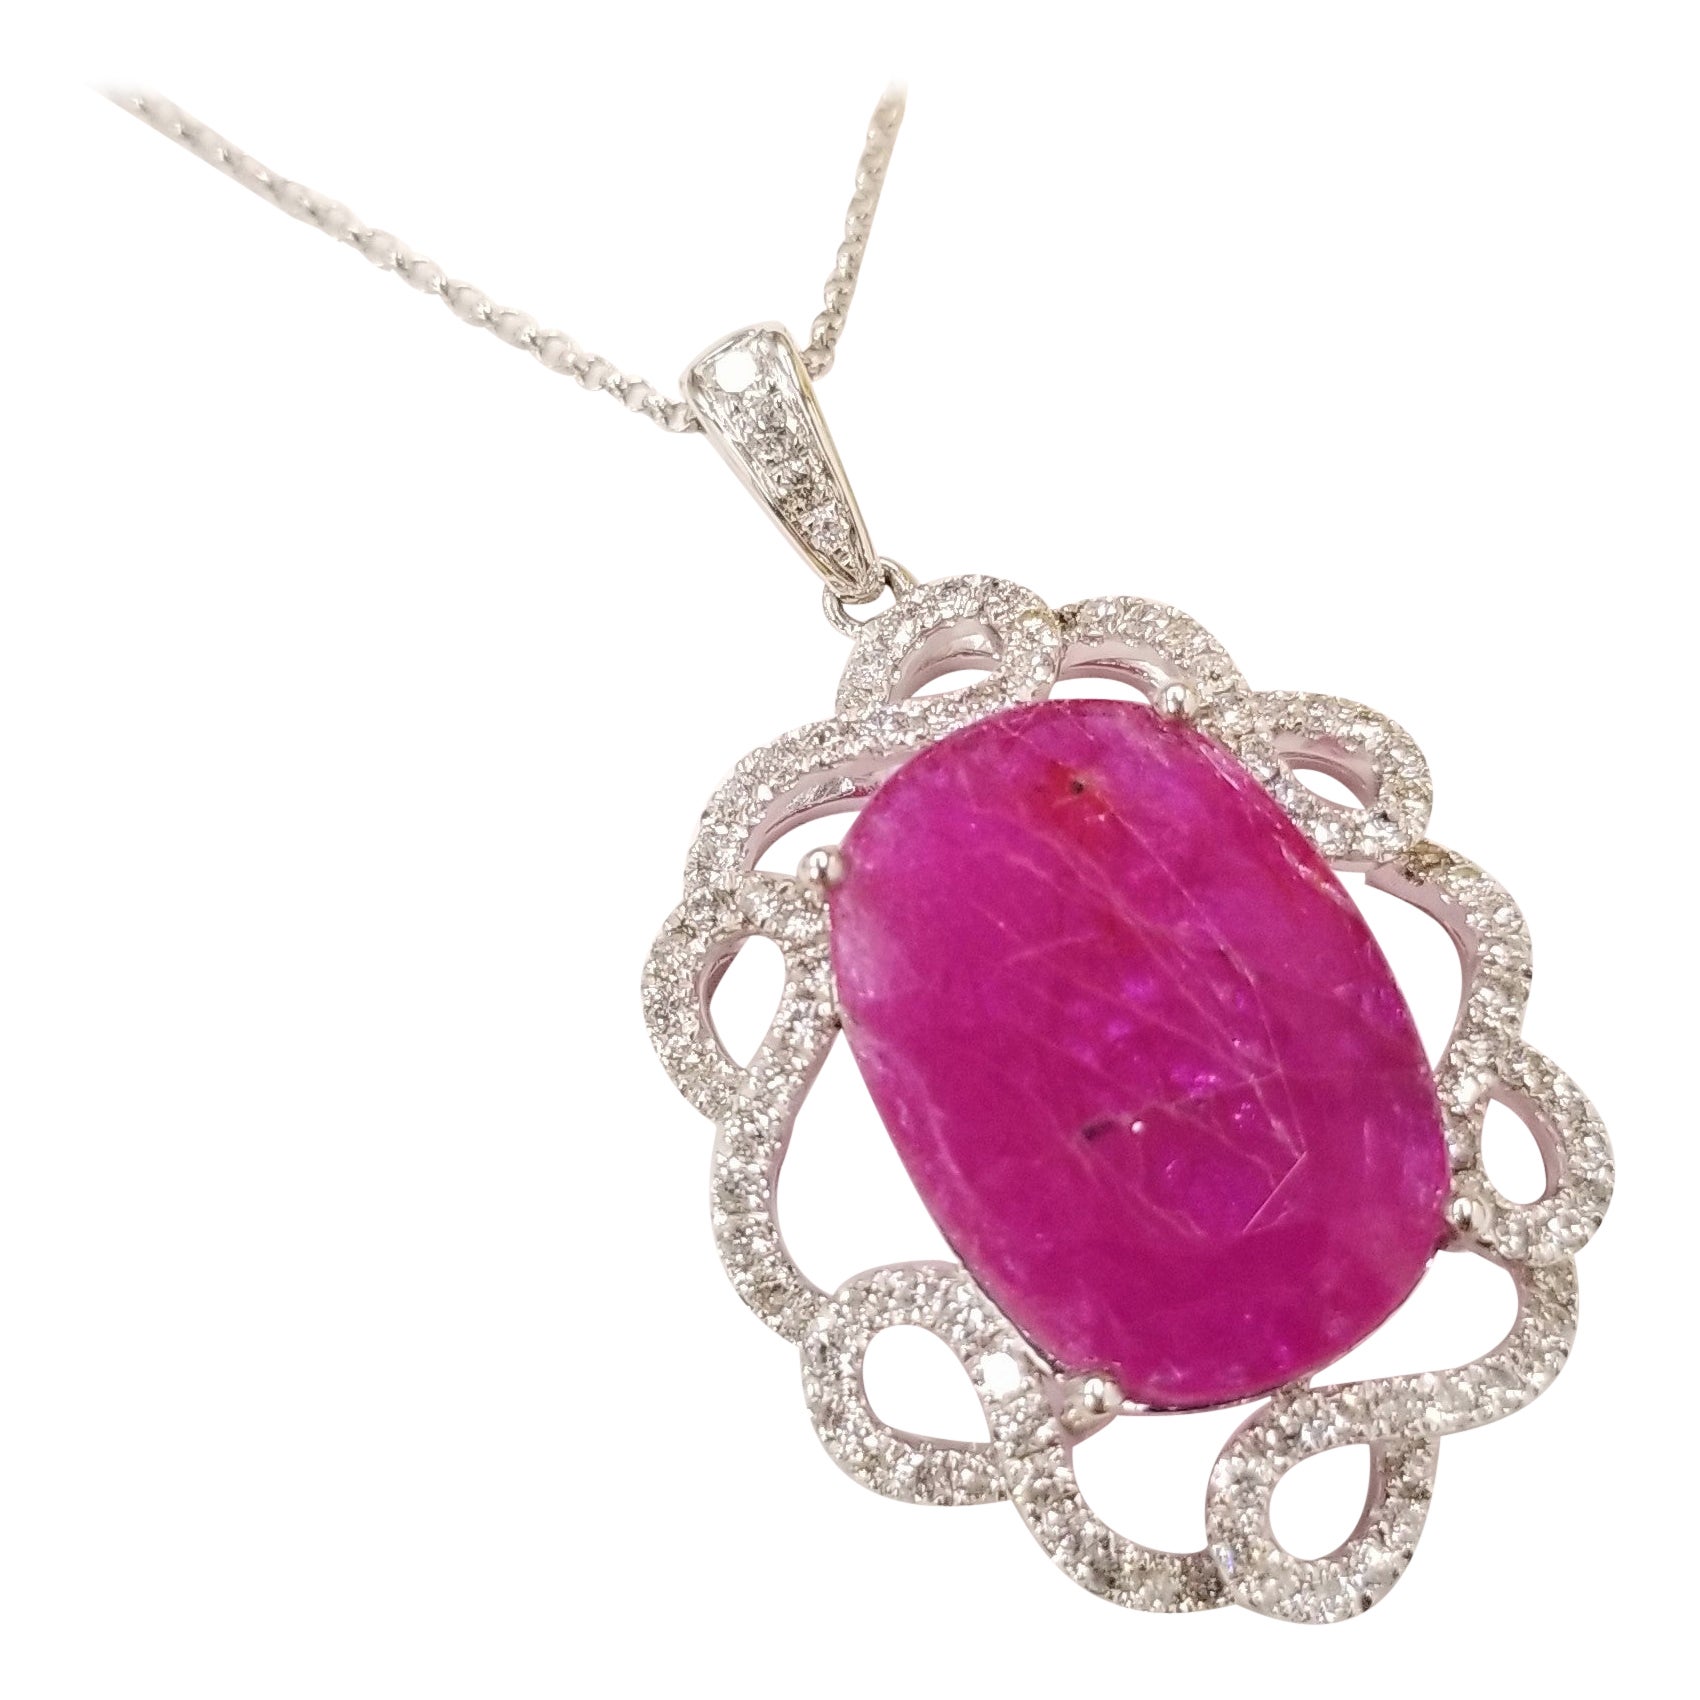 Collectible unheated ruby pendent.
The ruby weighs an impressive 8.88 carat and has a beautiful oval shape along with an deep purlish-red color that makes it so special. It is complemented by 0.99 carats of round brilliant-cut diamonds adding